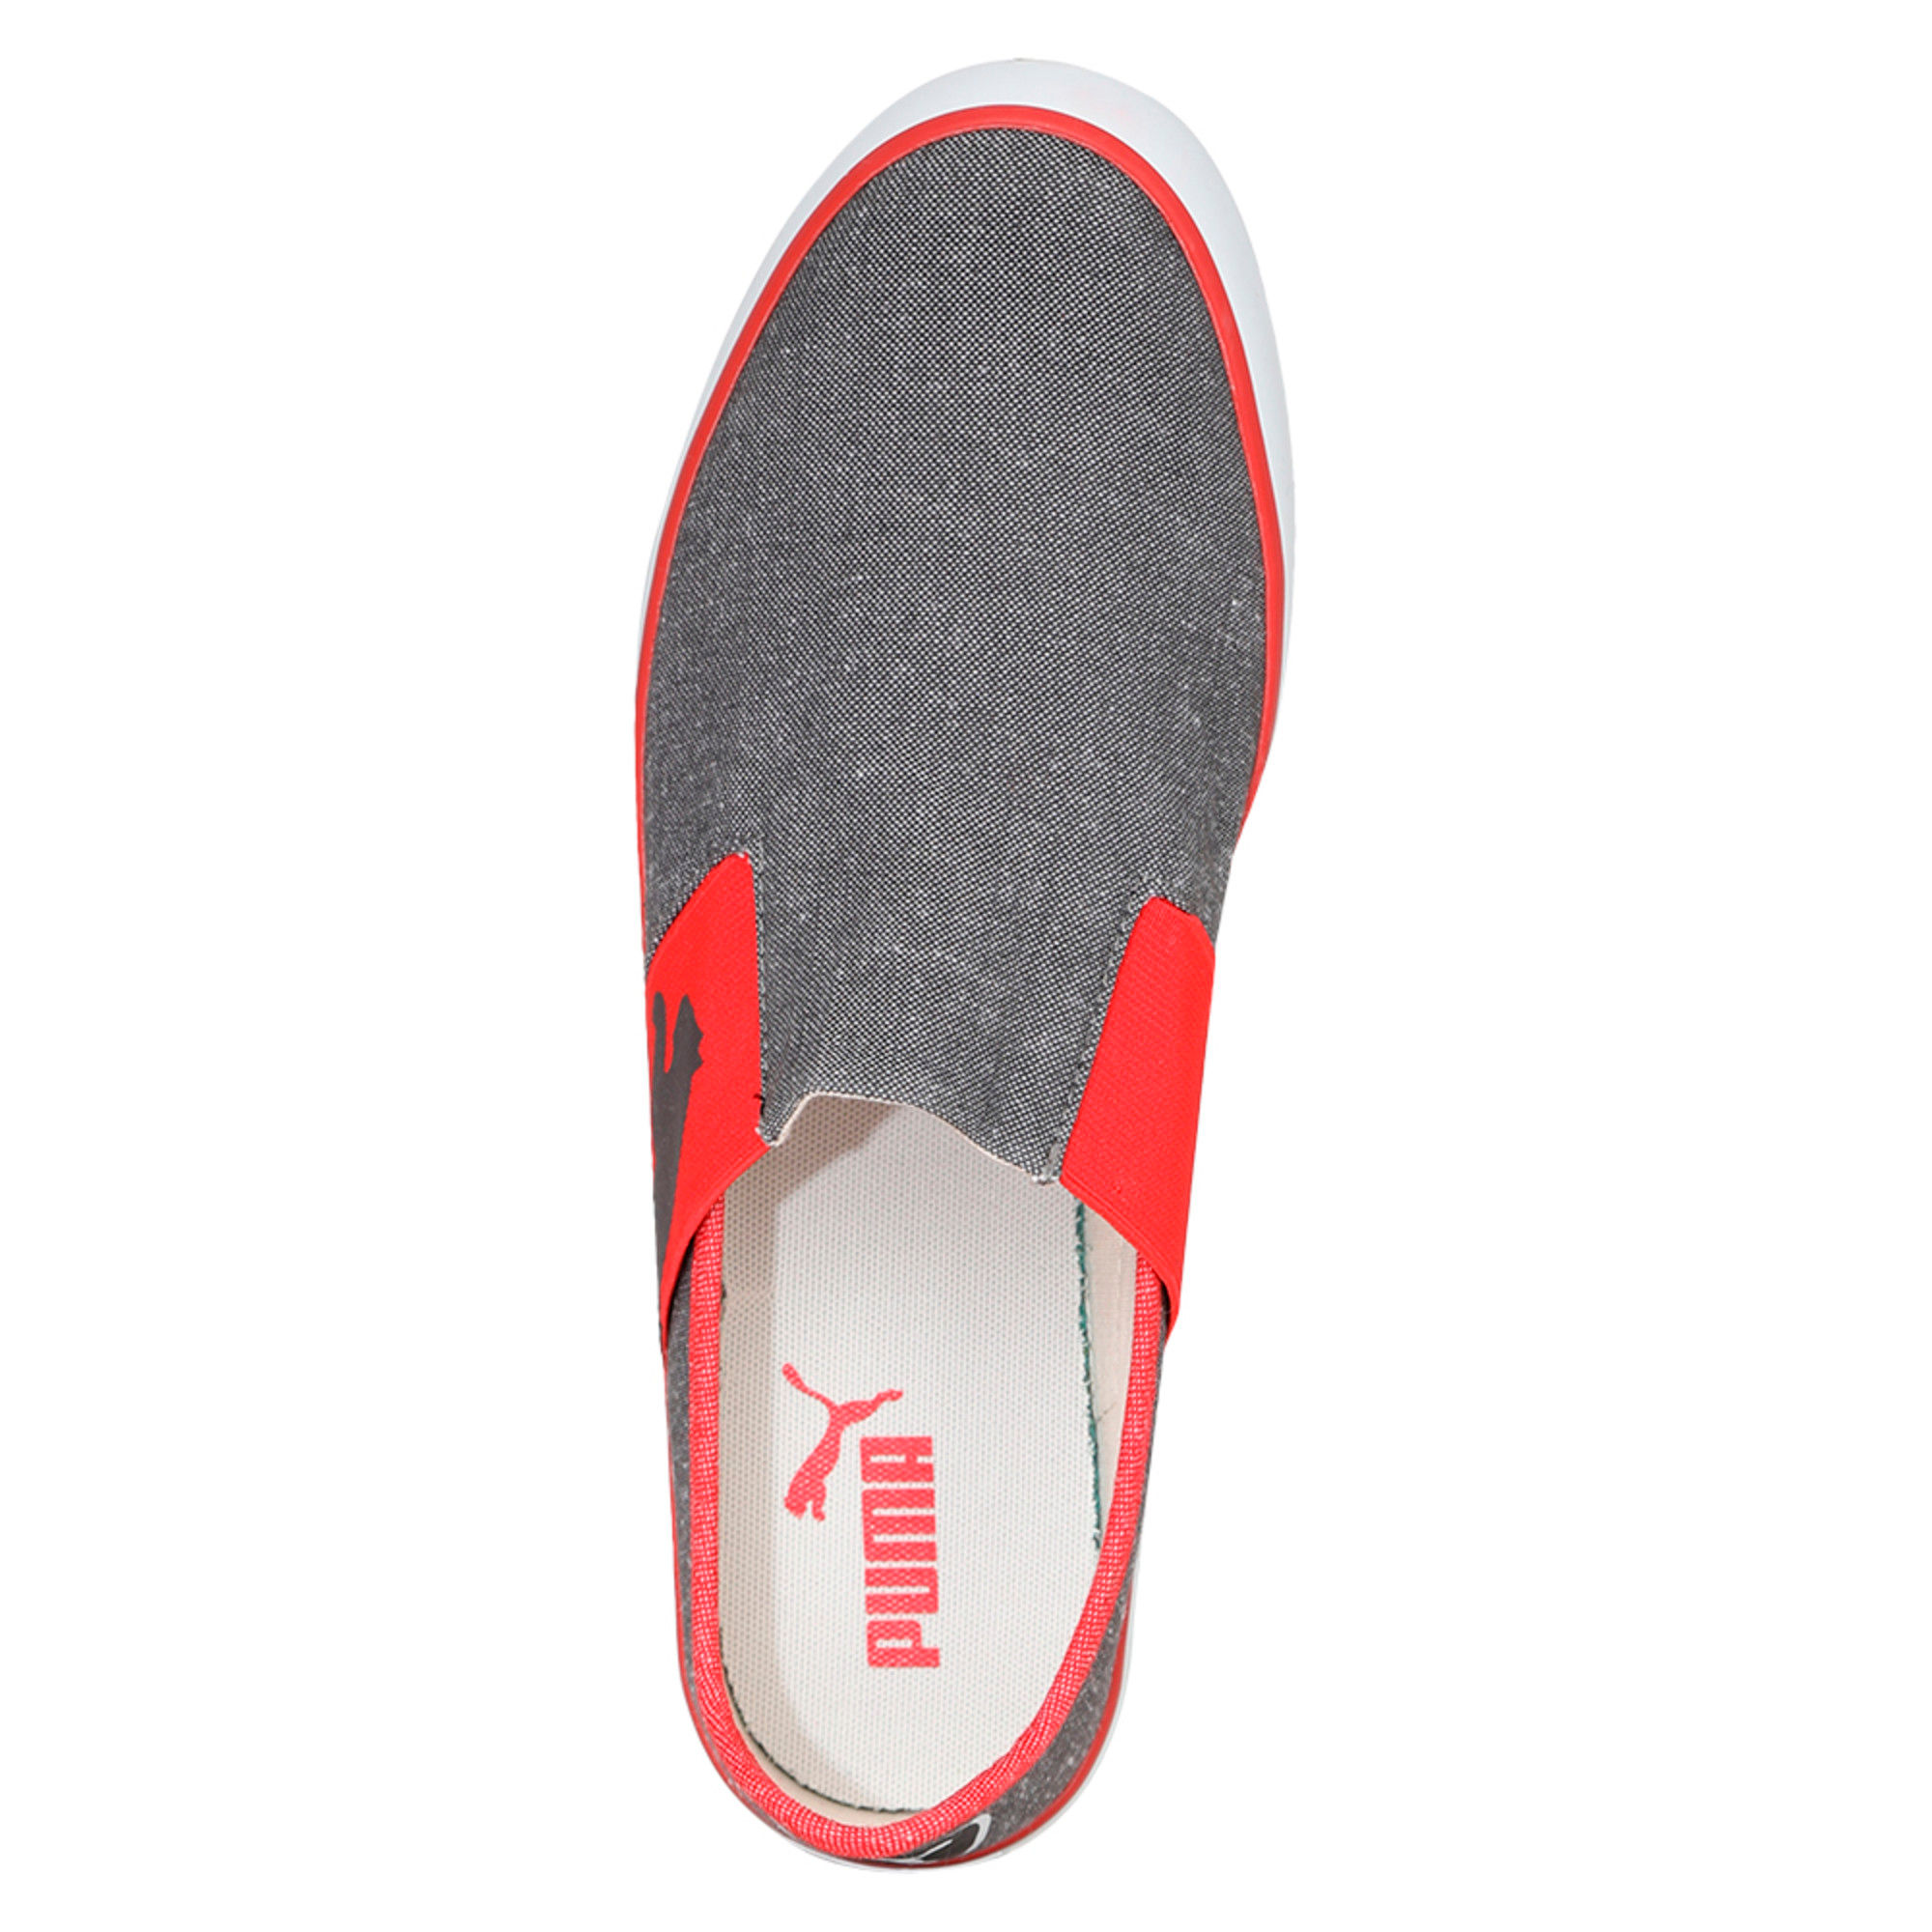 PUMA Lazy Slip On II DP Sneakers For Men - Buy Periscope-Glacier Gray-High  Risk Red Color PUMA Lazy Slip On II DP Sneakers For Men Online at Best  Price - Shop Online